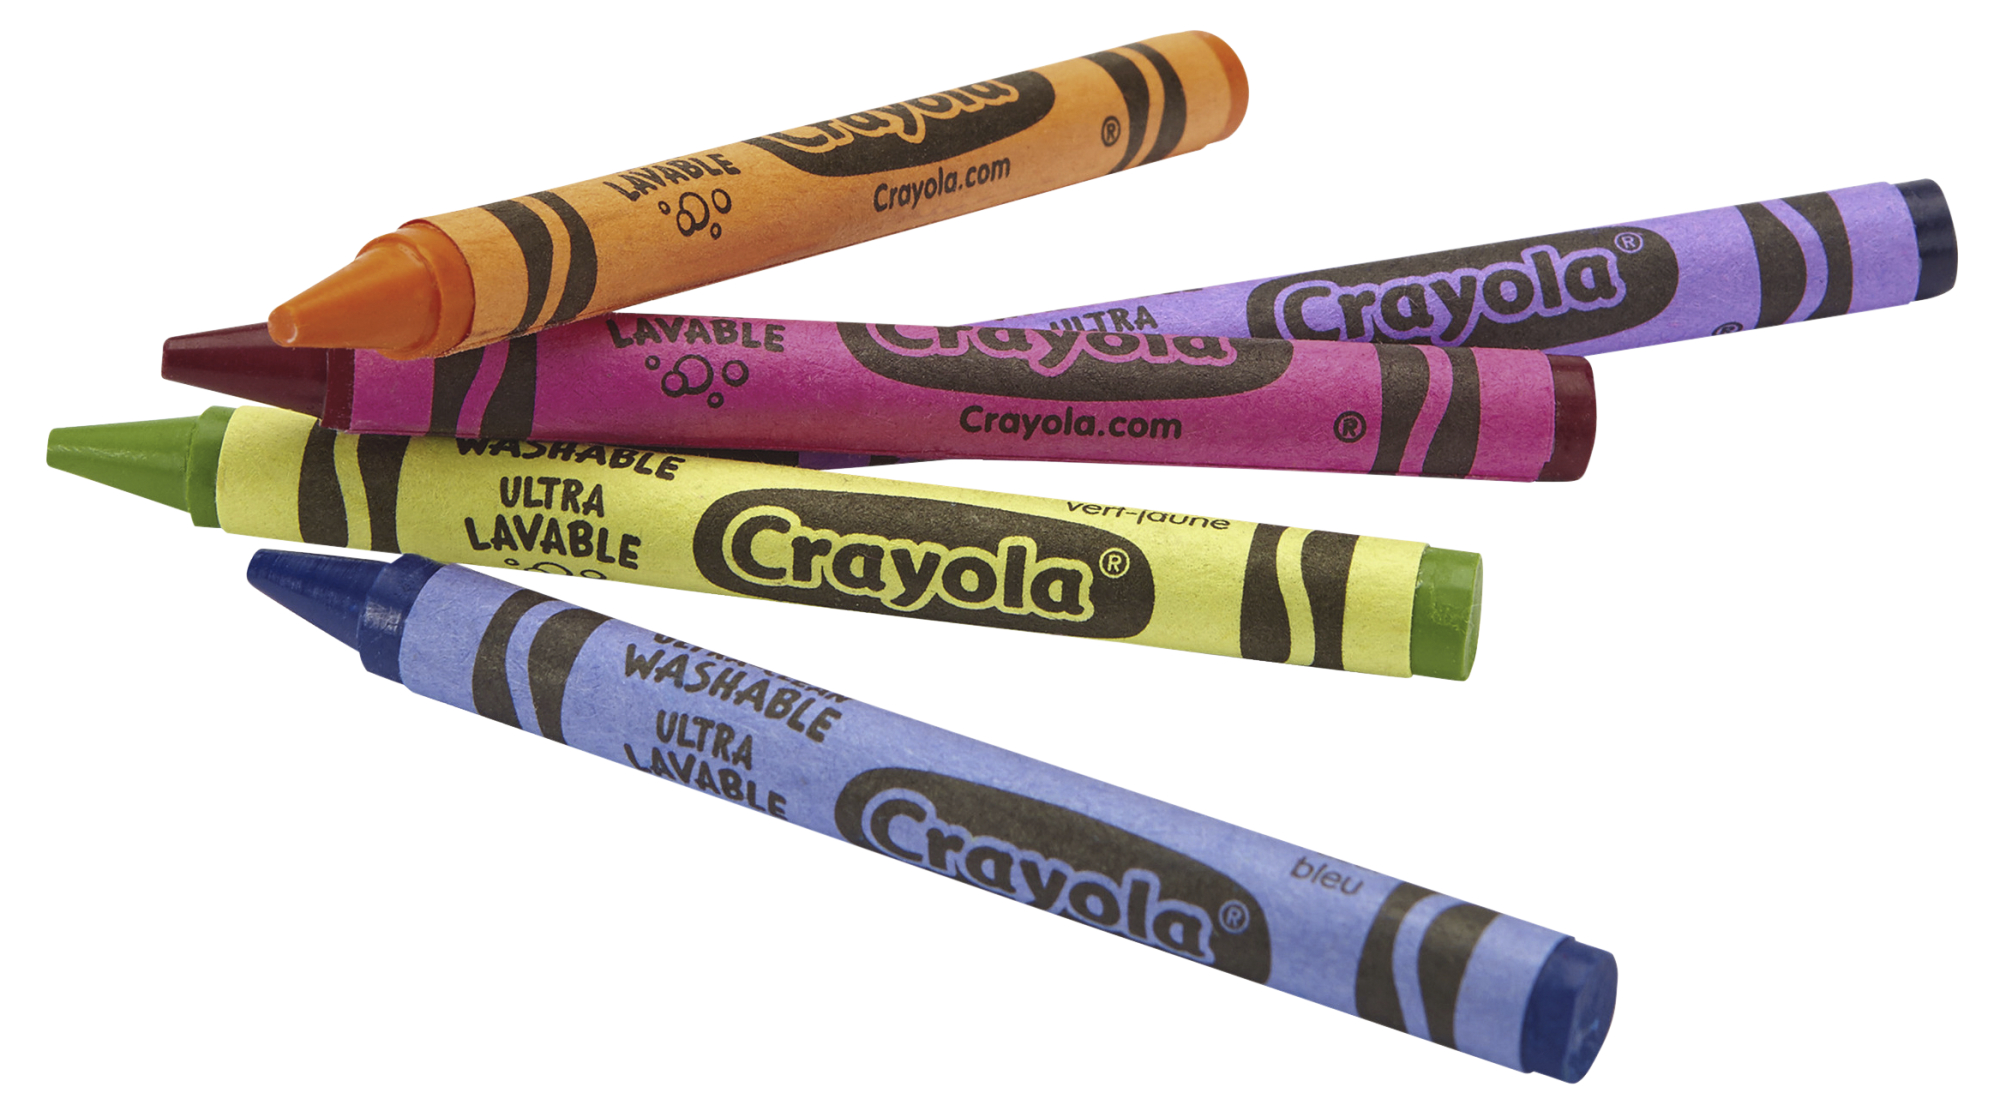 Crayola Ultra Clean Washable Color Max Crayons, Large Size, Set of 8, Multi-Color - image 3 of 6